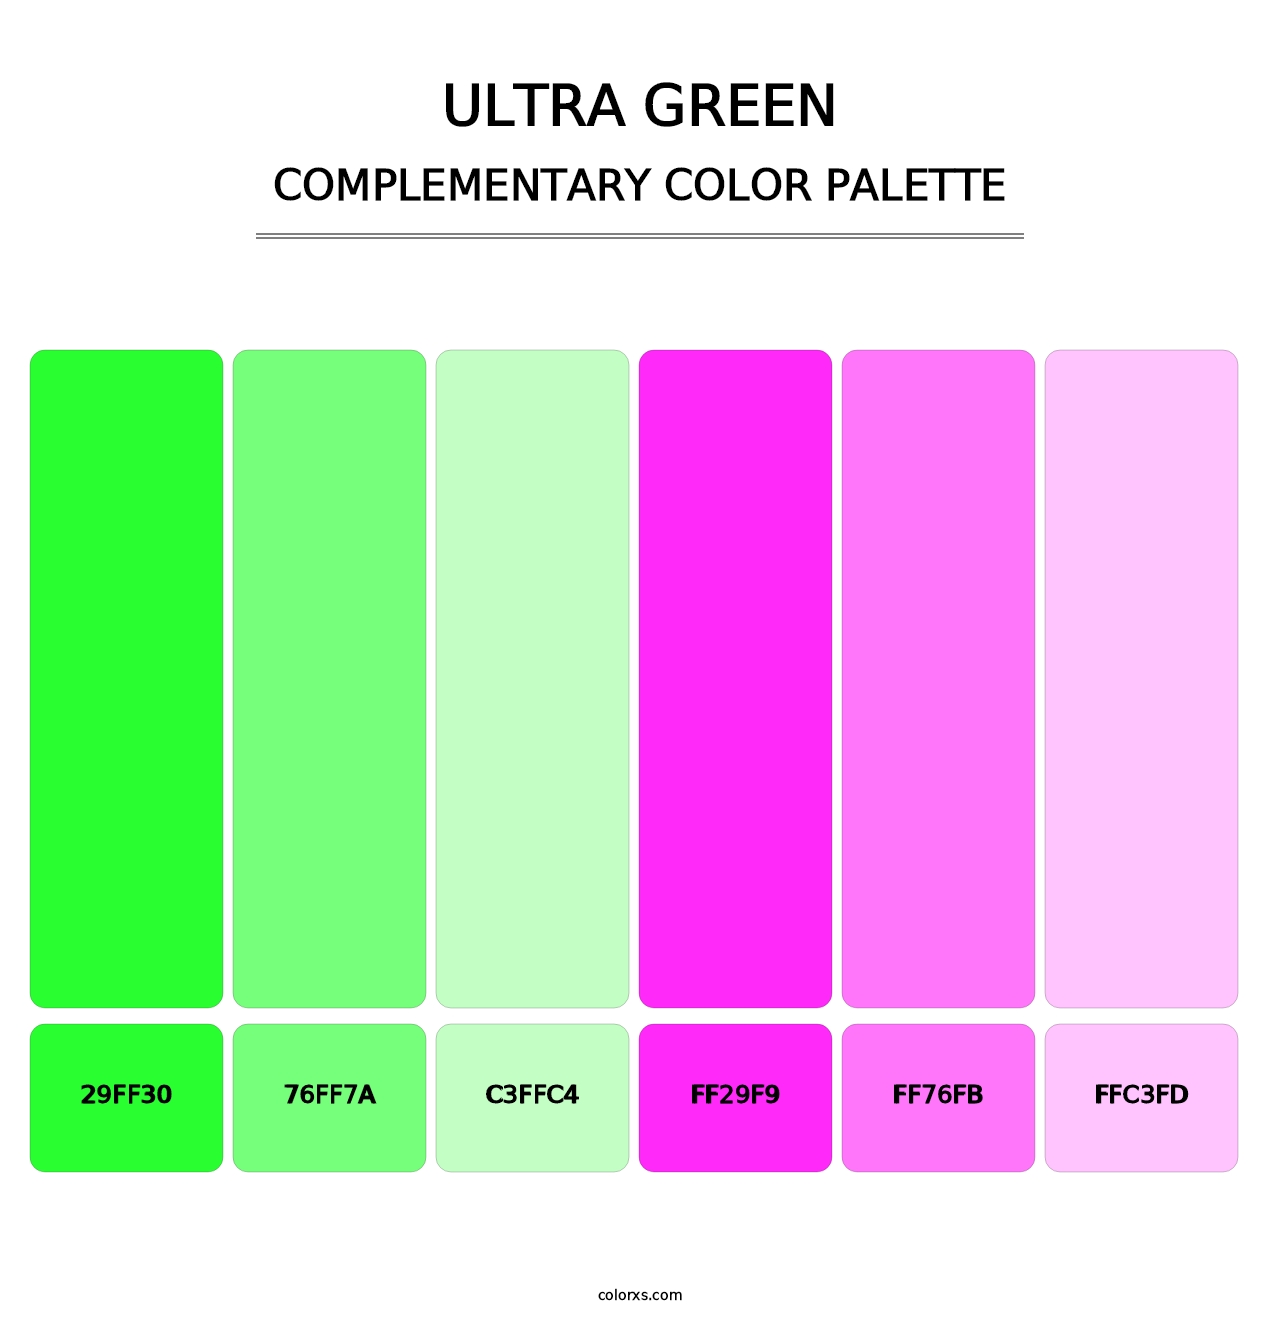 Ultra Green - Complementary Color Palette